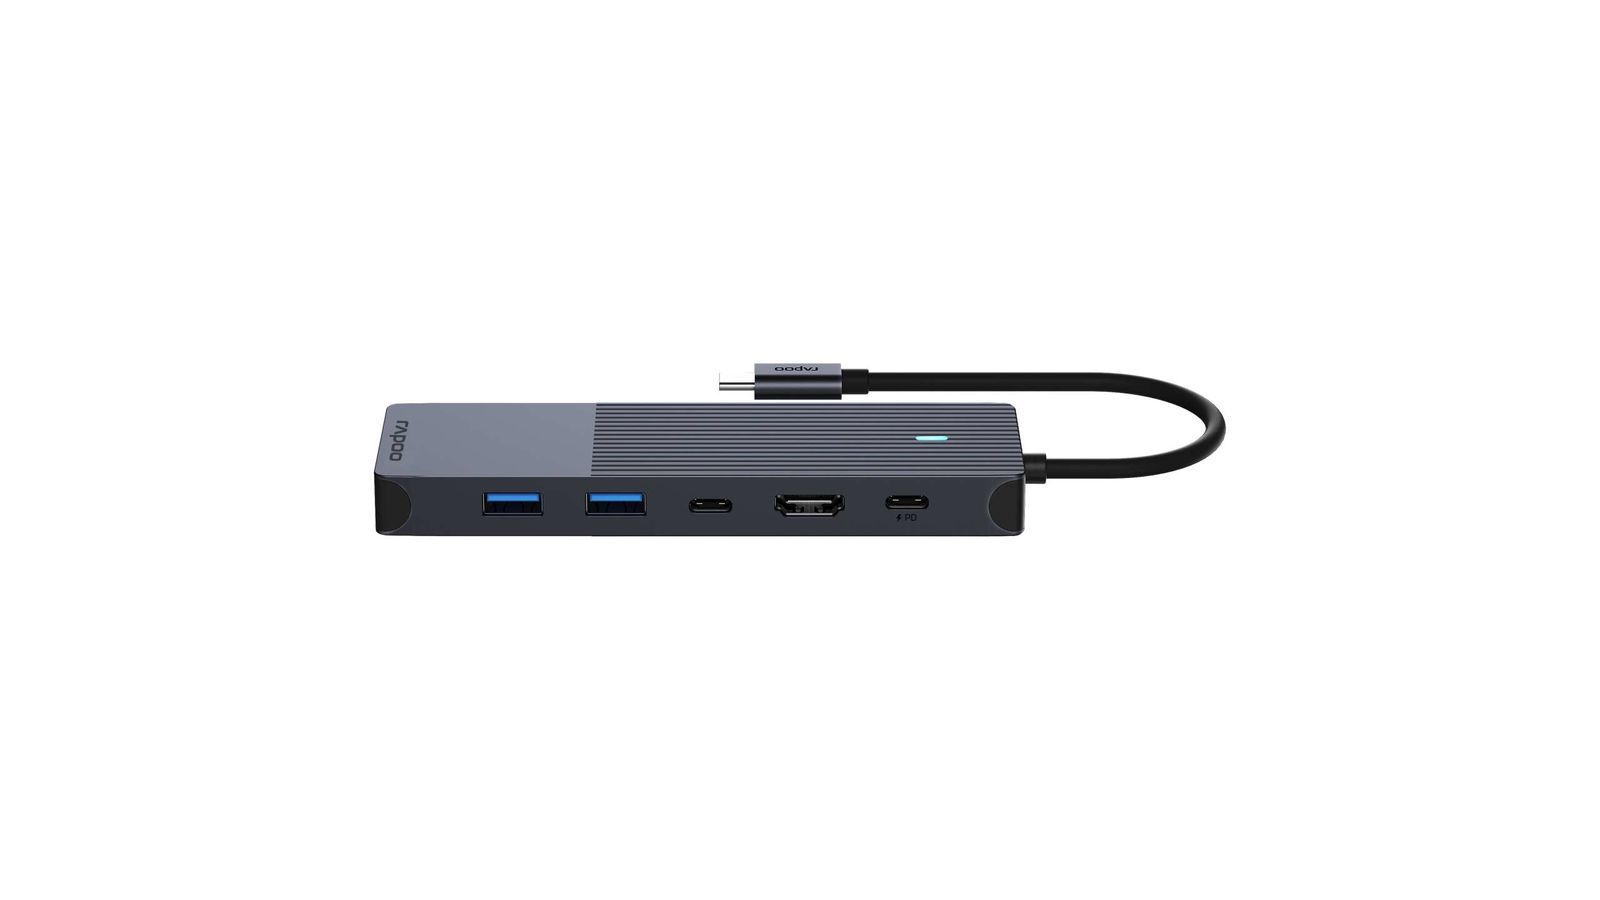 Rapoo UCM-2002 6-in-1 USB-C Multiport Adapter 100W Power Delivery HDMI LAN USB-C USB-A 3.0 v1.0